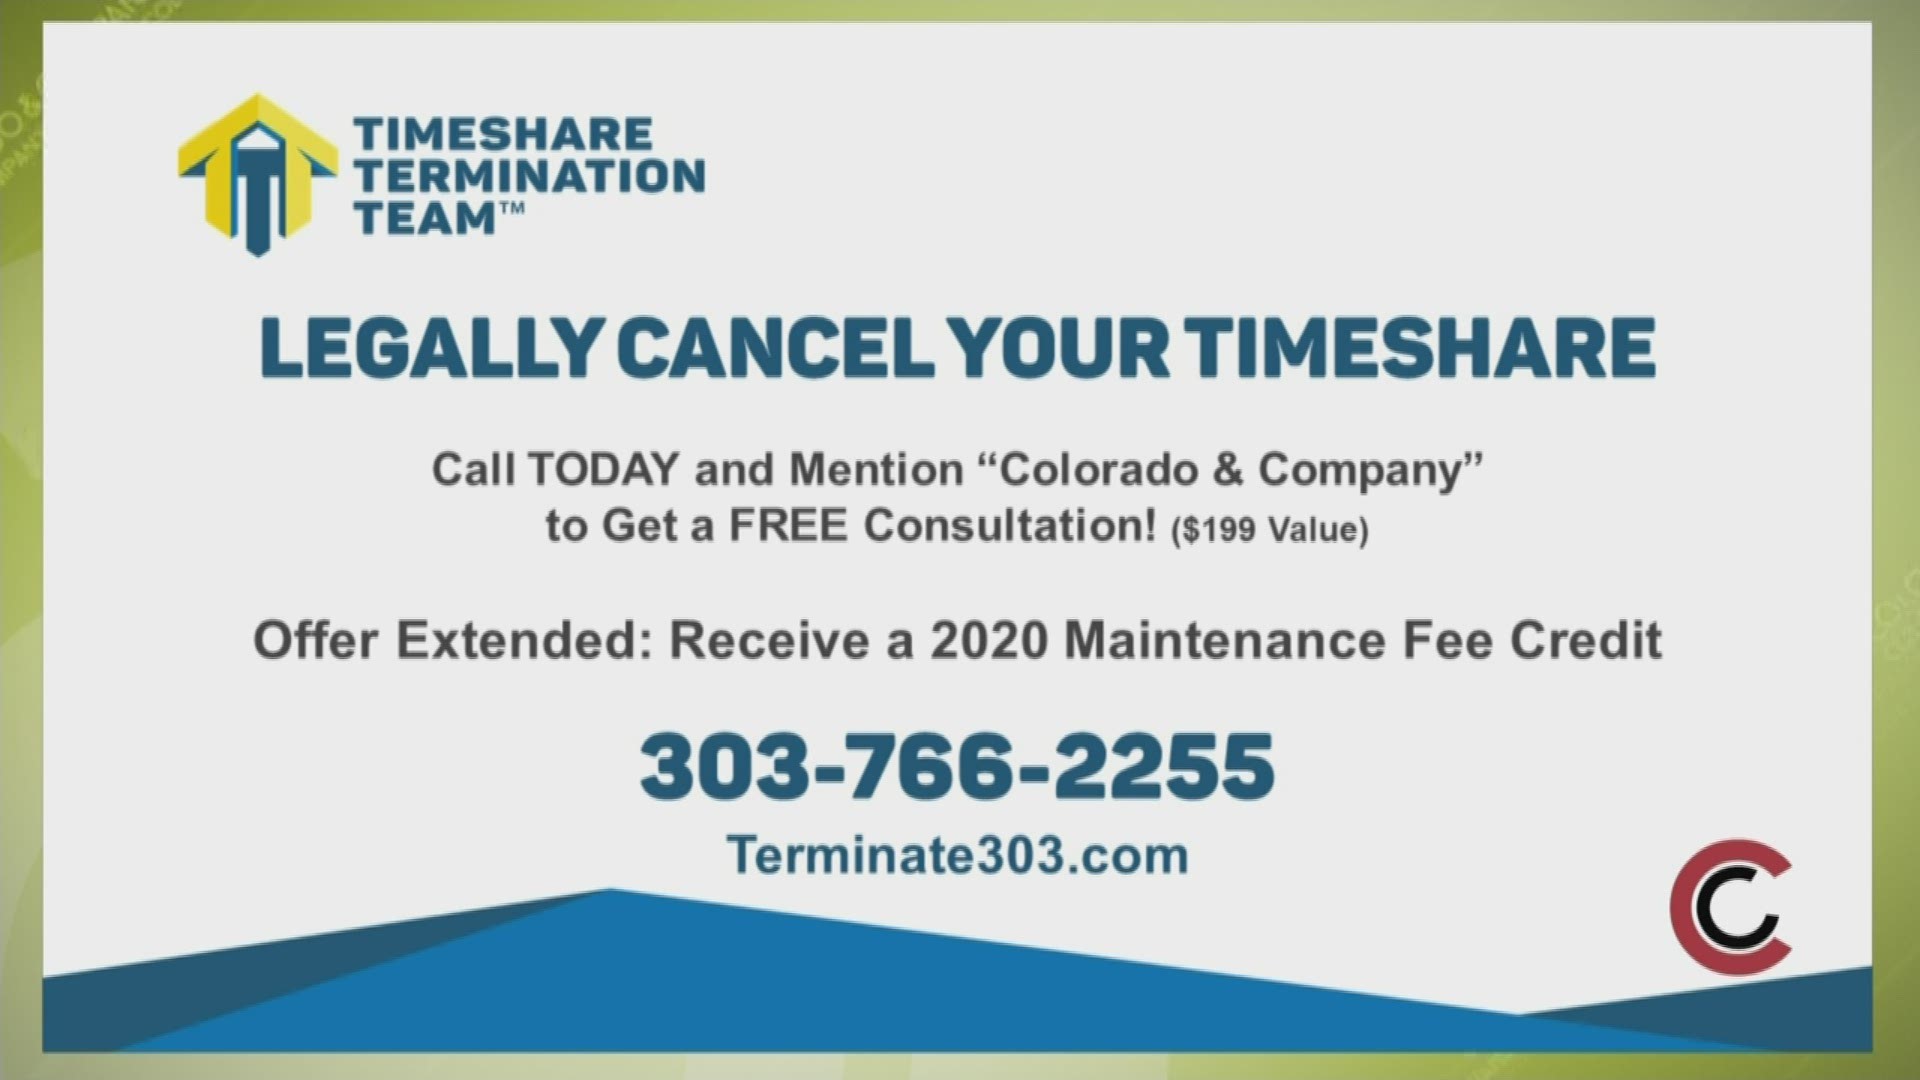 Call Timeshare Termination Team at 303.766.2255 and mention COCO to get a free consultation! Visit Terminate303.com to learn more about getting out of your timeshare